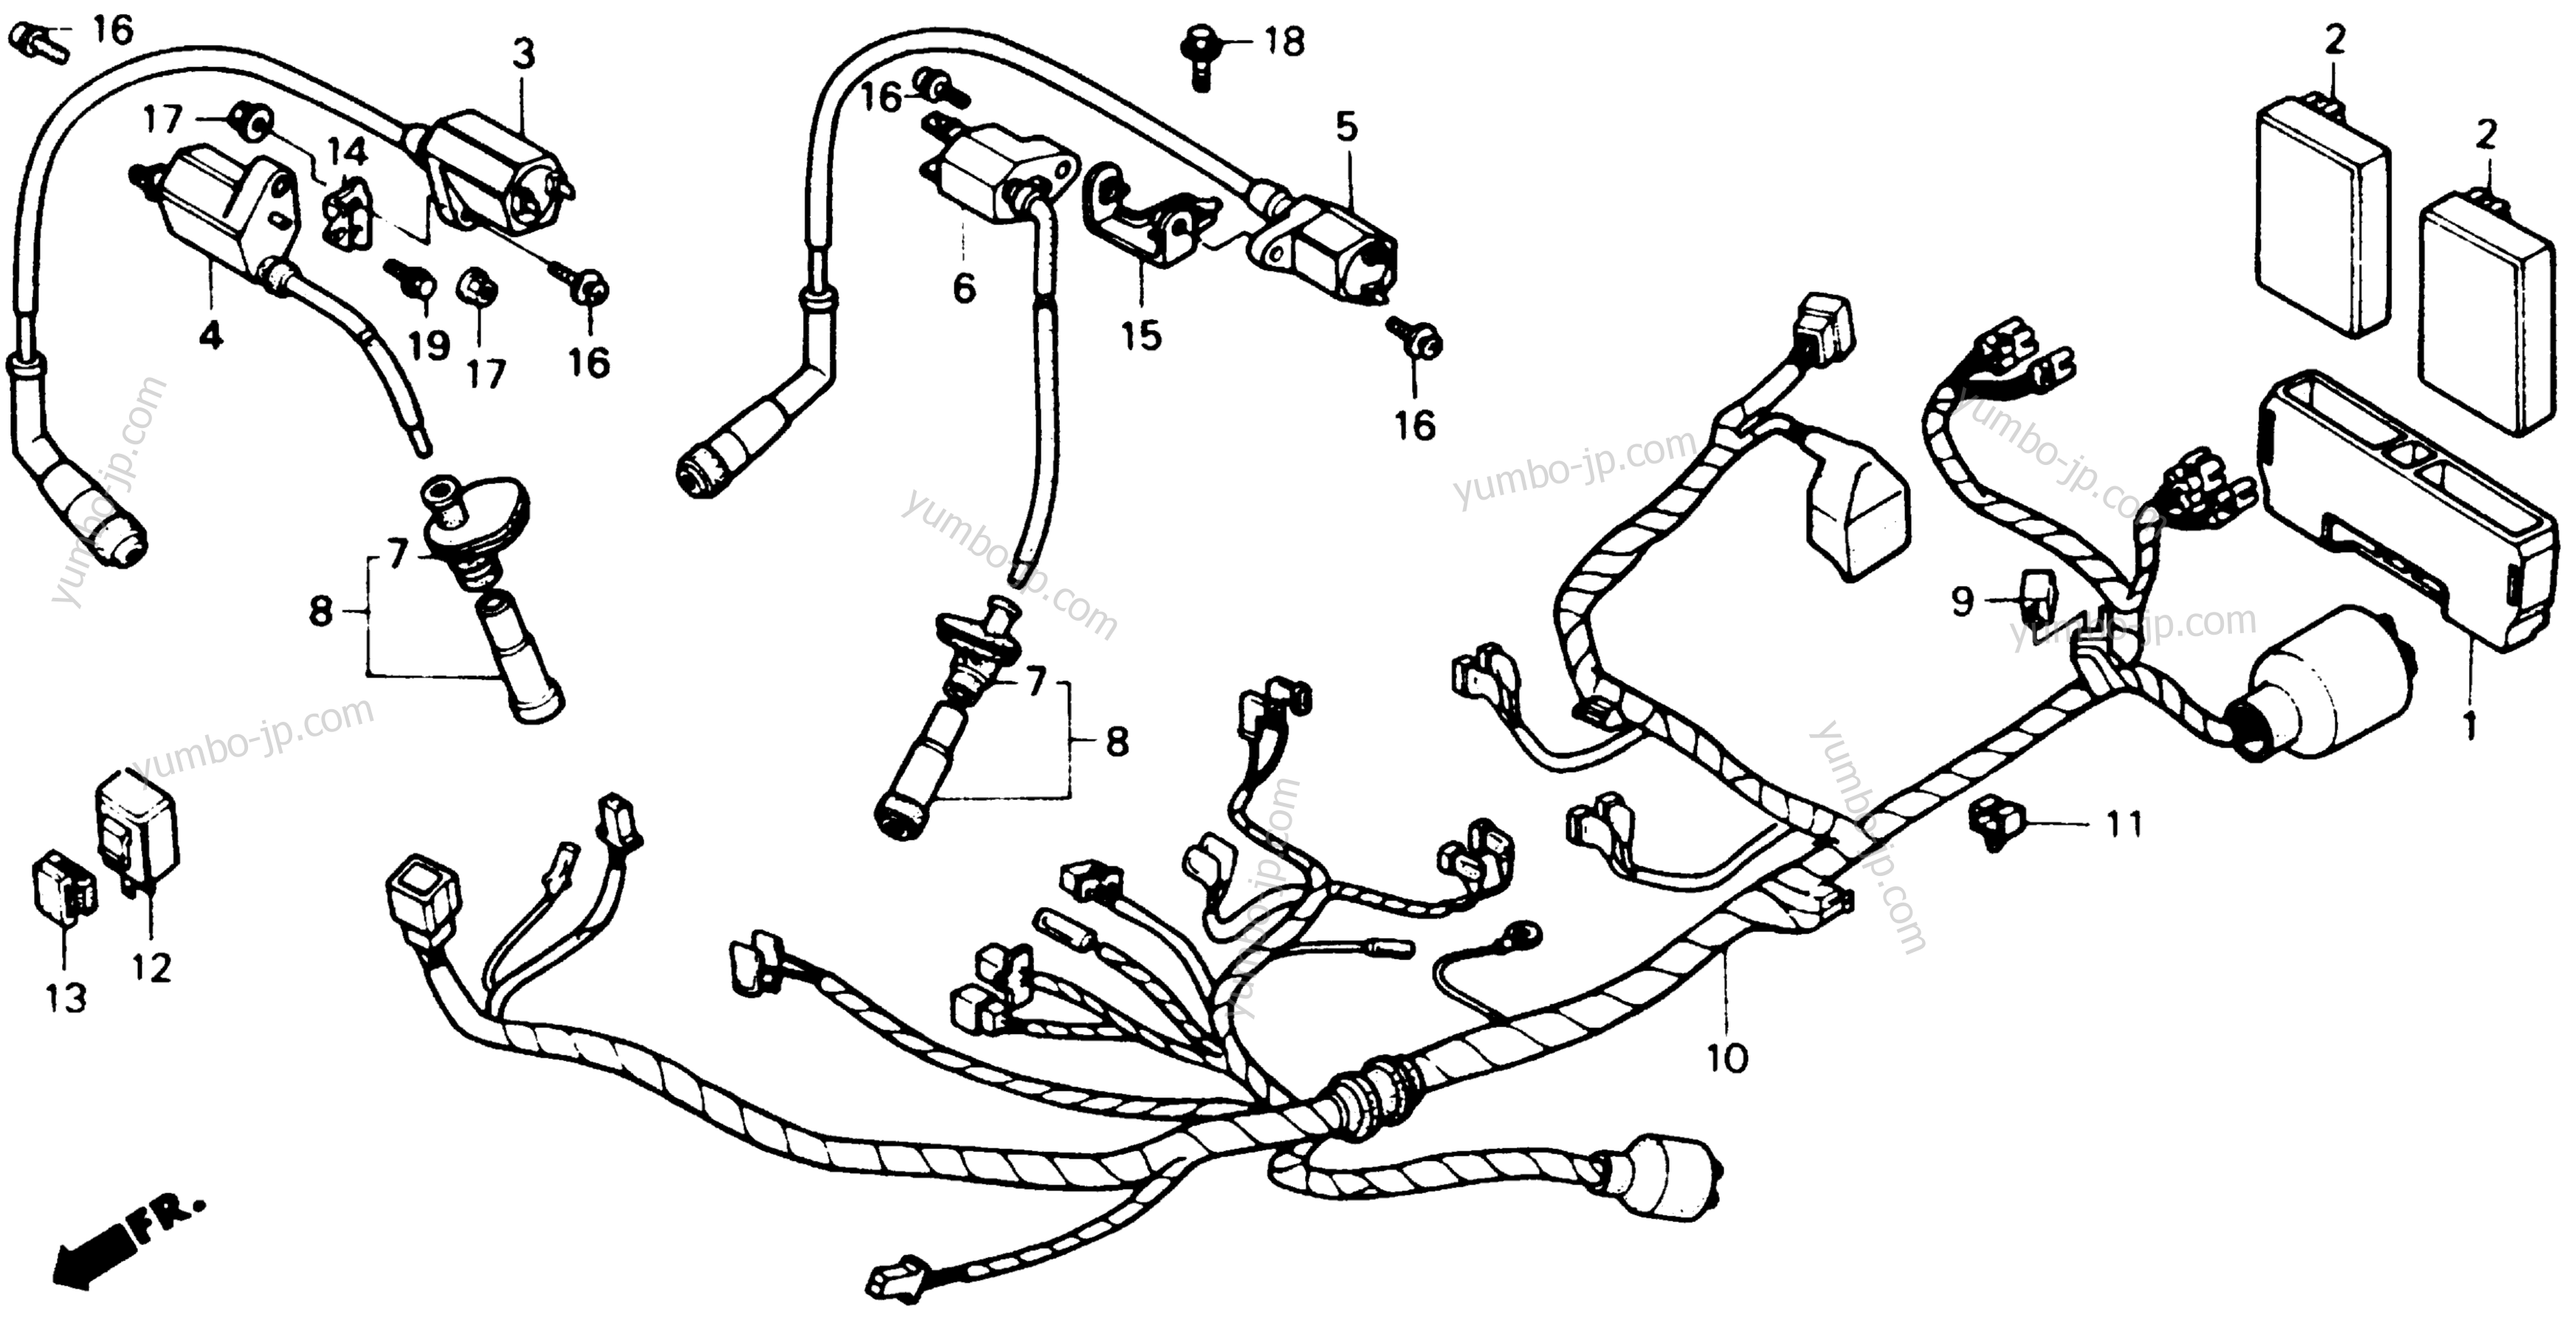 WIRE HARNESS for motorcycles HONDA XL600V A 1990 year